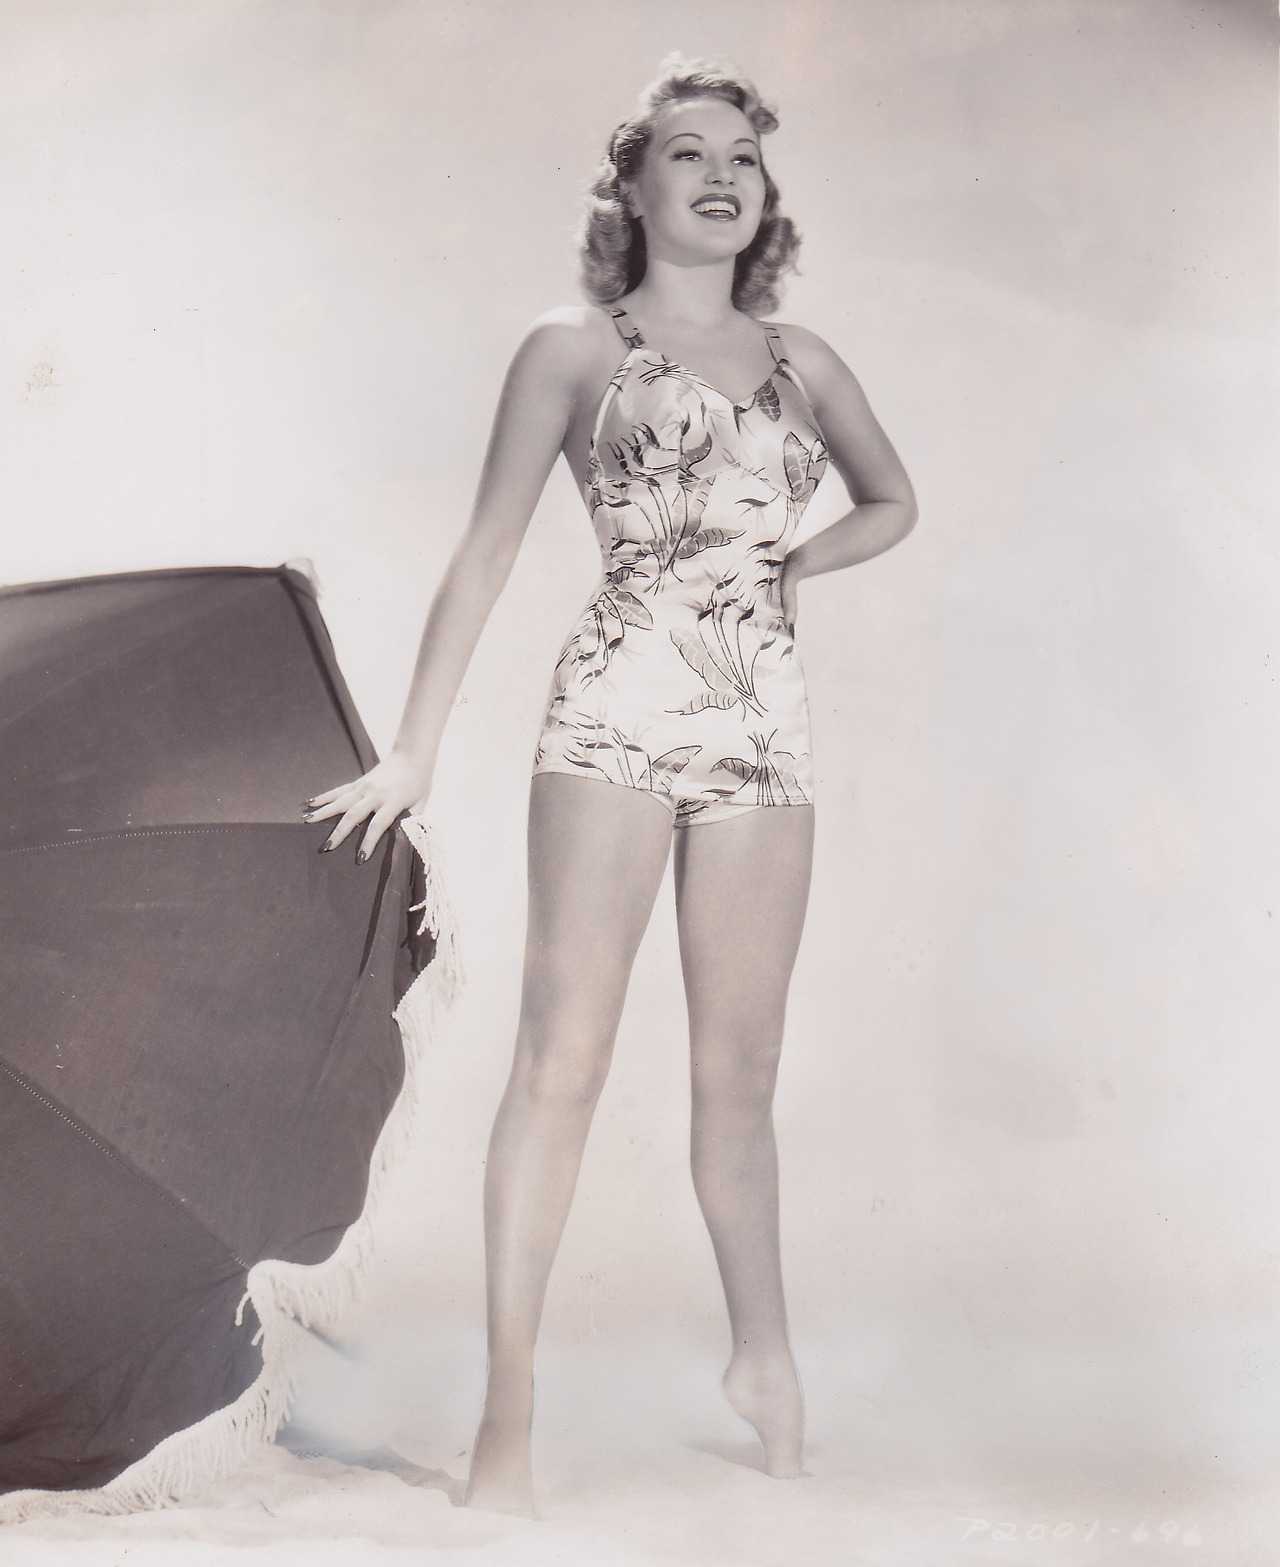 51 Hottest Betty Grable Bikini pictures Are An Embodiment Of Greatness 41